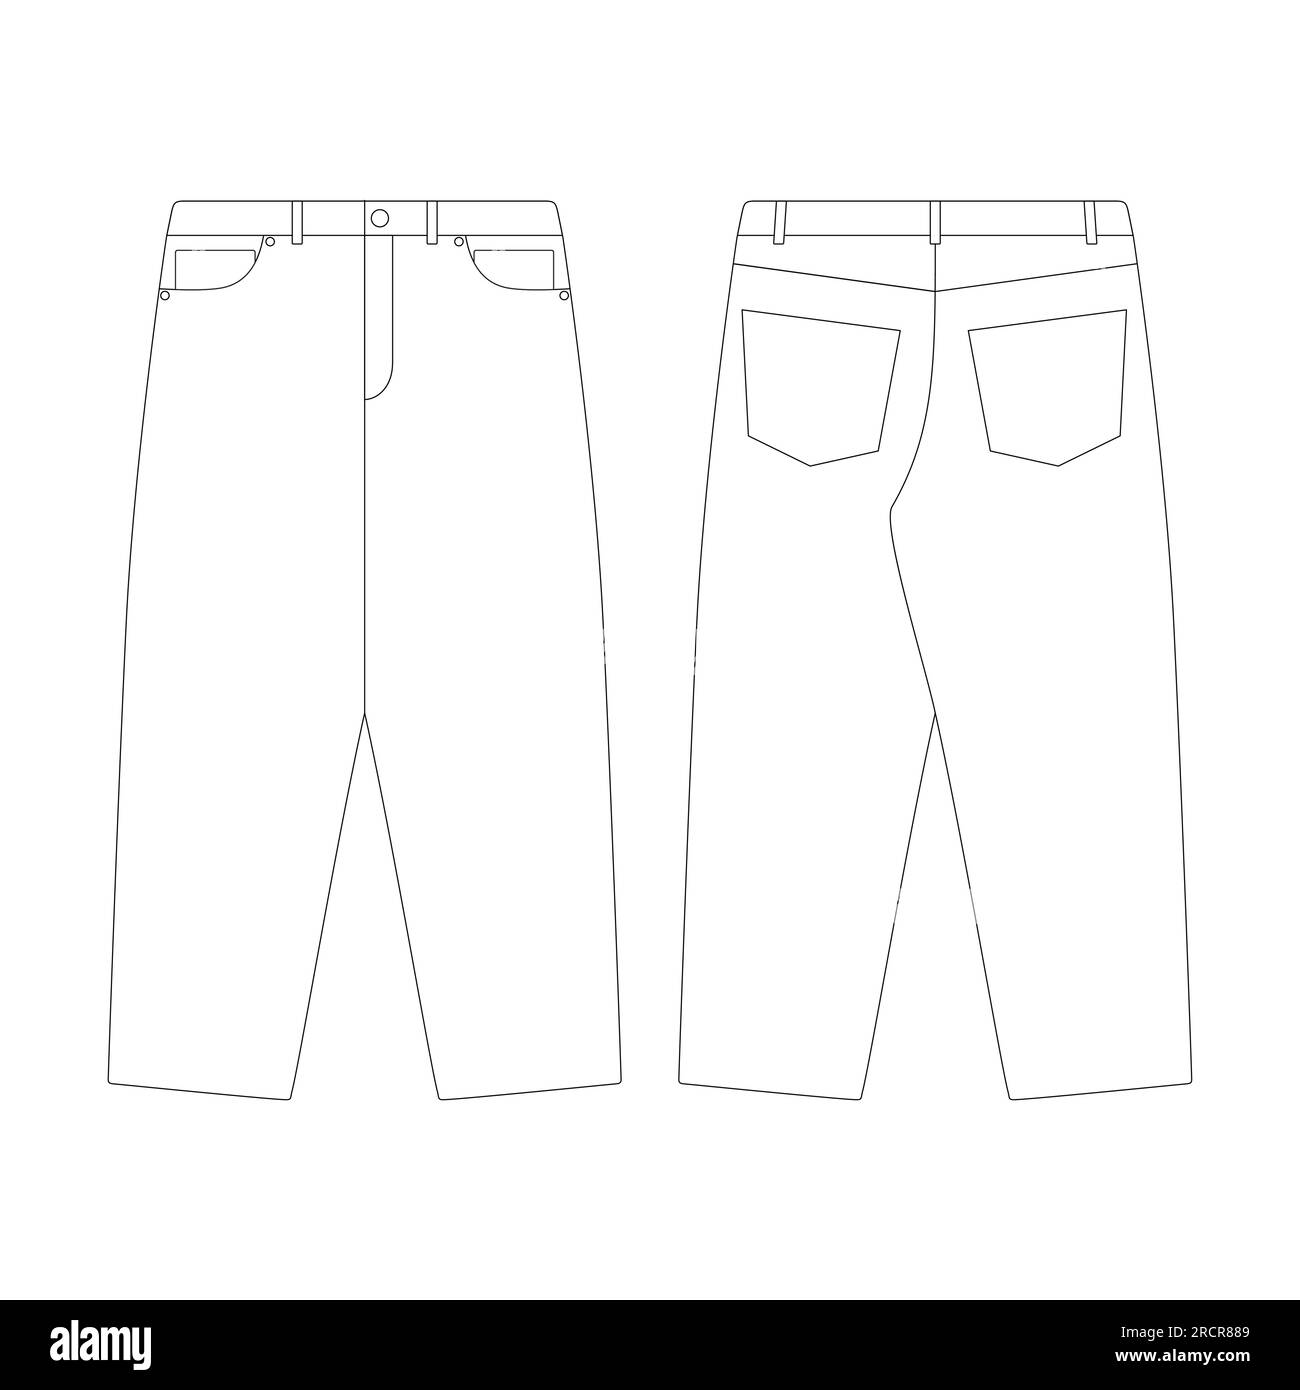 Baggy Jeans Denim Pants Technical Fashion Illustration With Full Length  Low Waist Rise 5 Pockets Flat Bottom Apparel Template Front Back  White Grey Color Style Women Men Unisex CAD Mockup Royalty Free